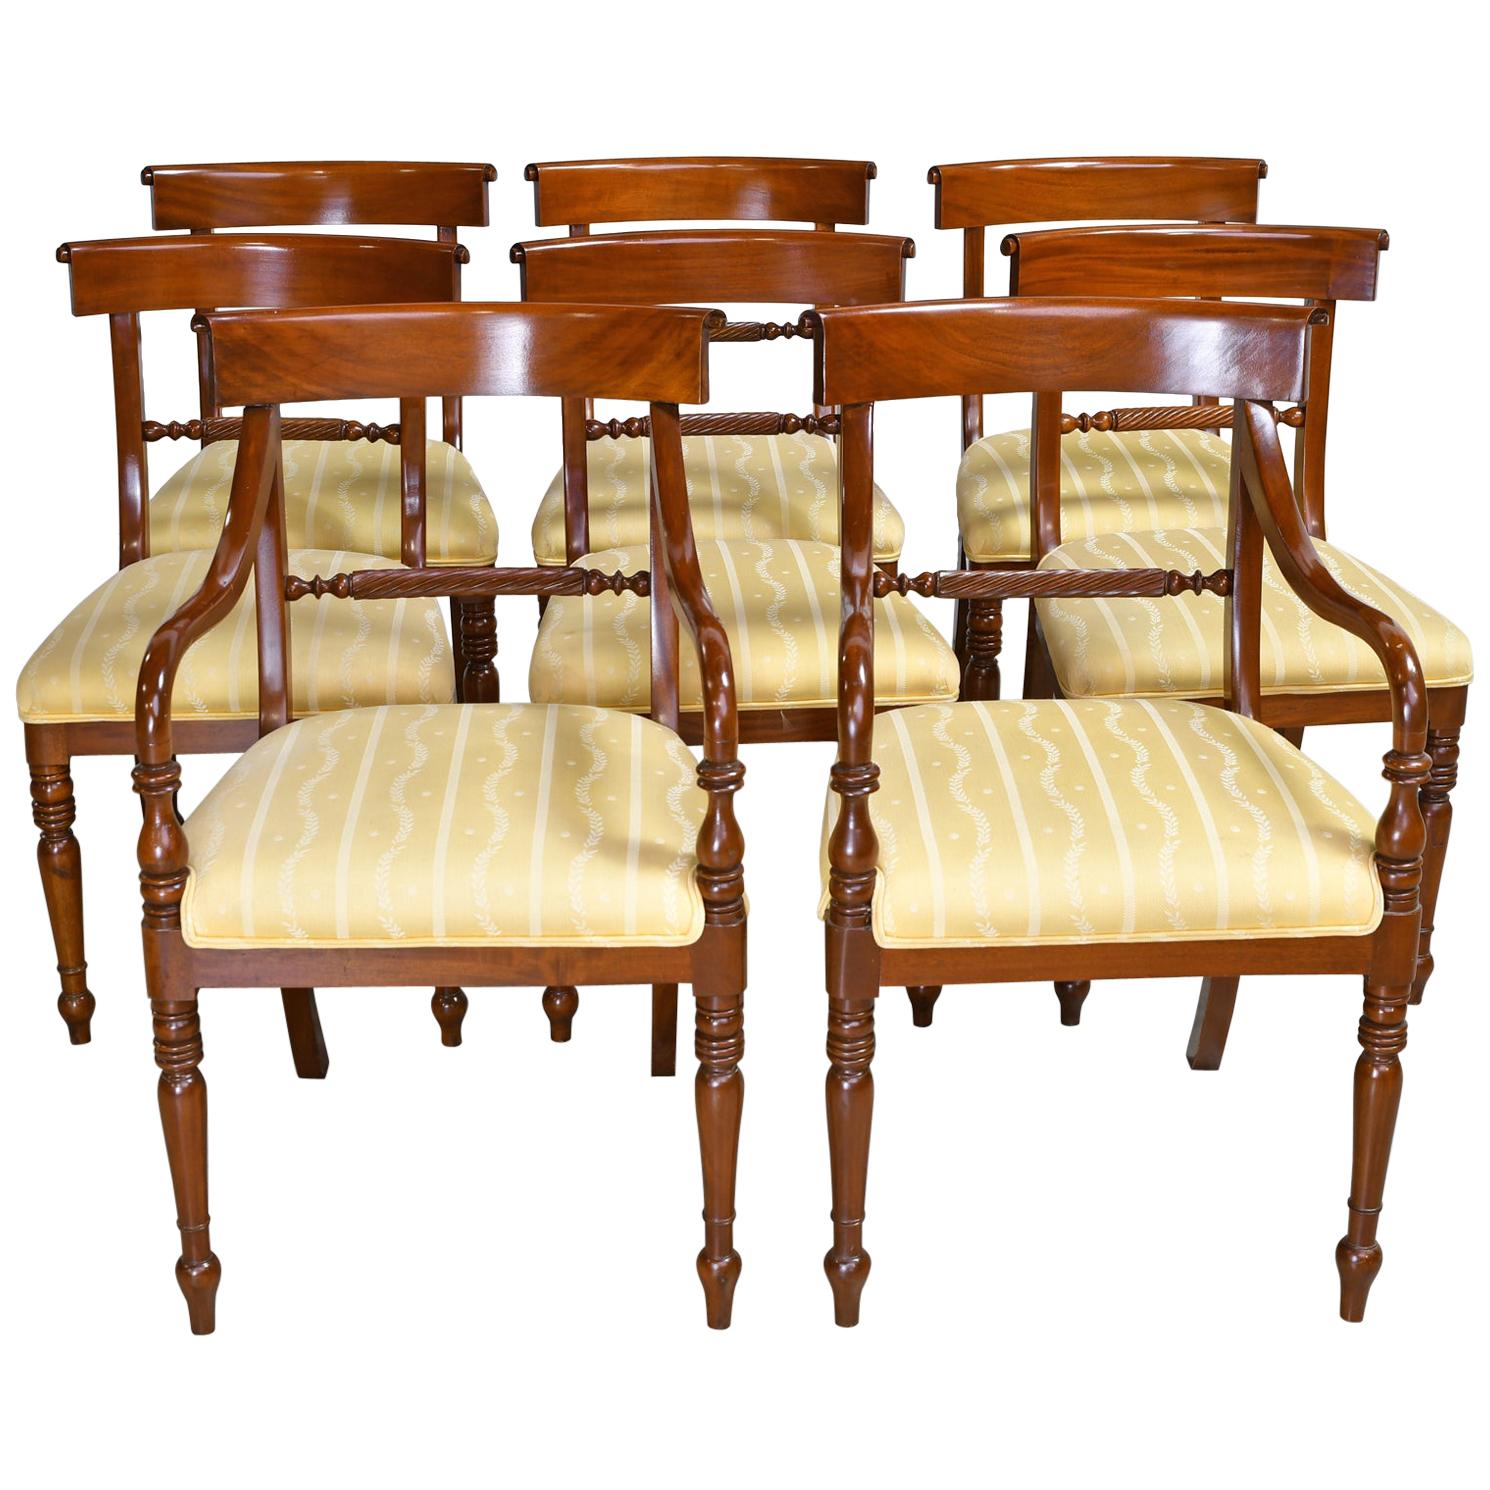 Set of Eight '8' Regency Style Dining Chairs in Mahogany with Upholstered Seat